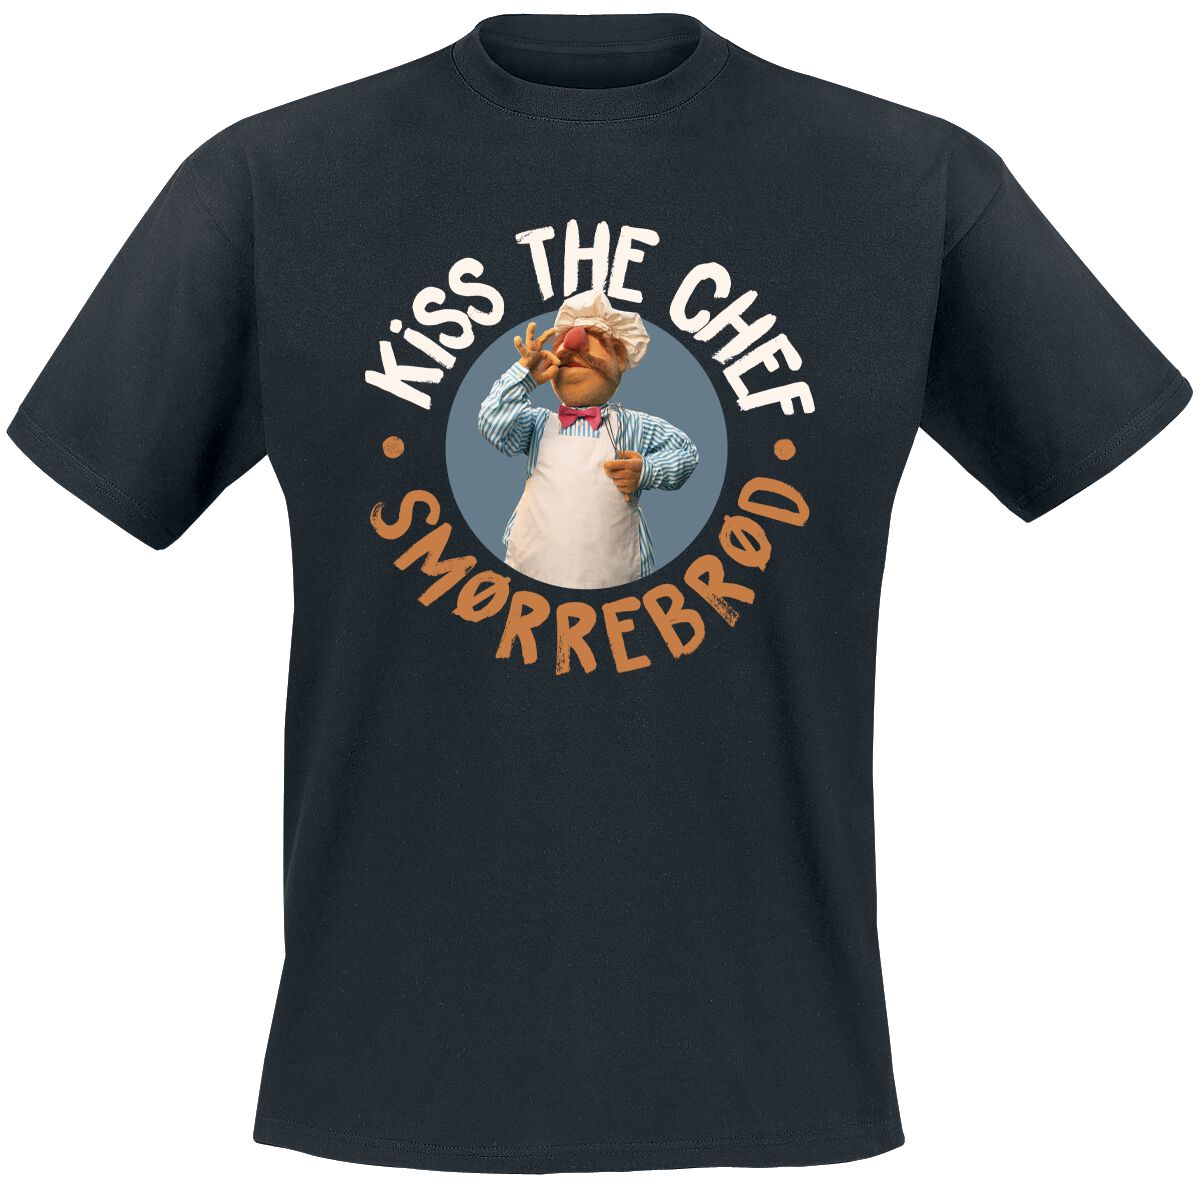 Die Muppets Kiss The Chef - Smorrebrod T-Shirt schwarz in 3XL